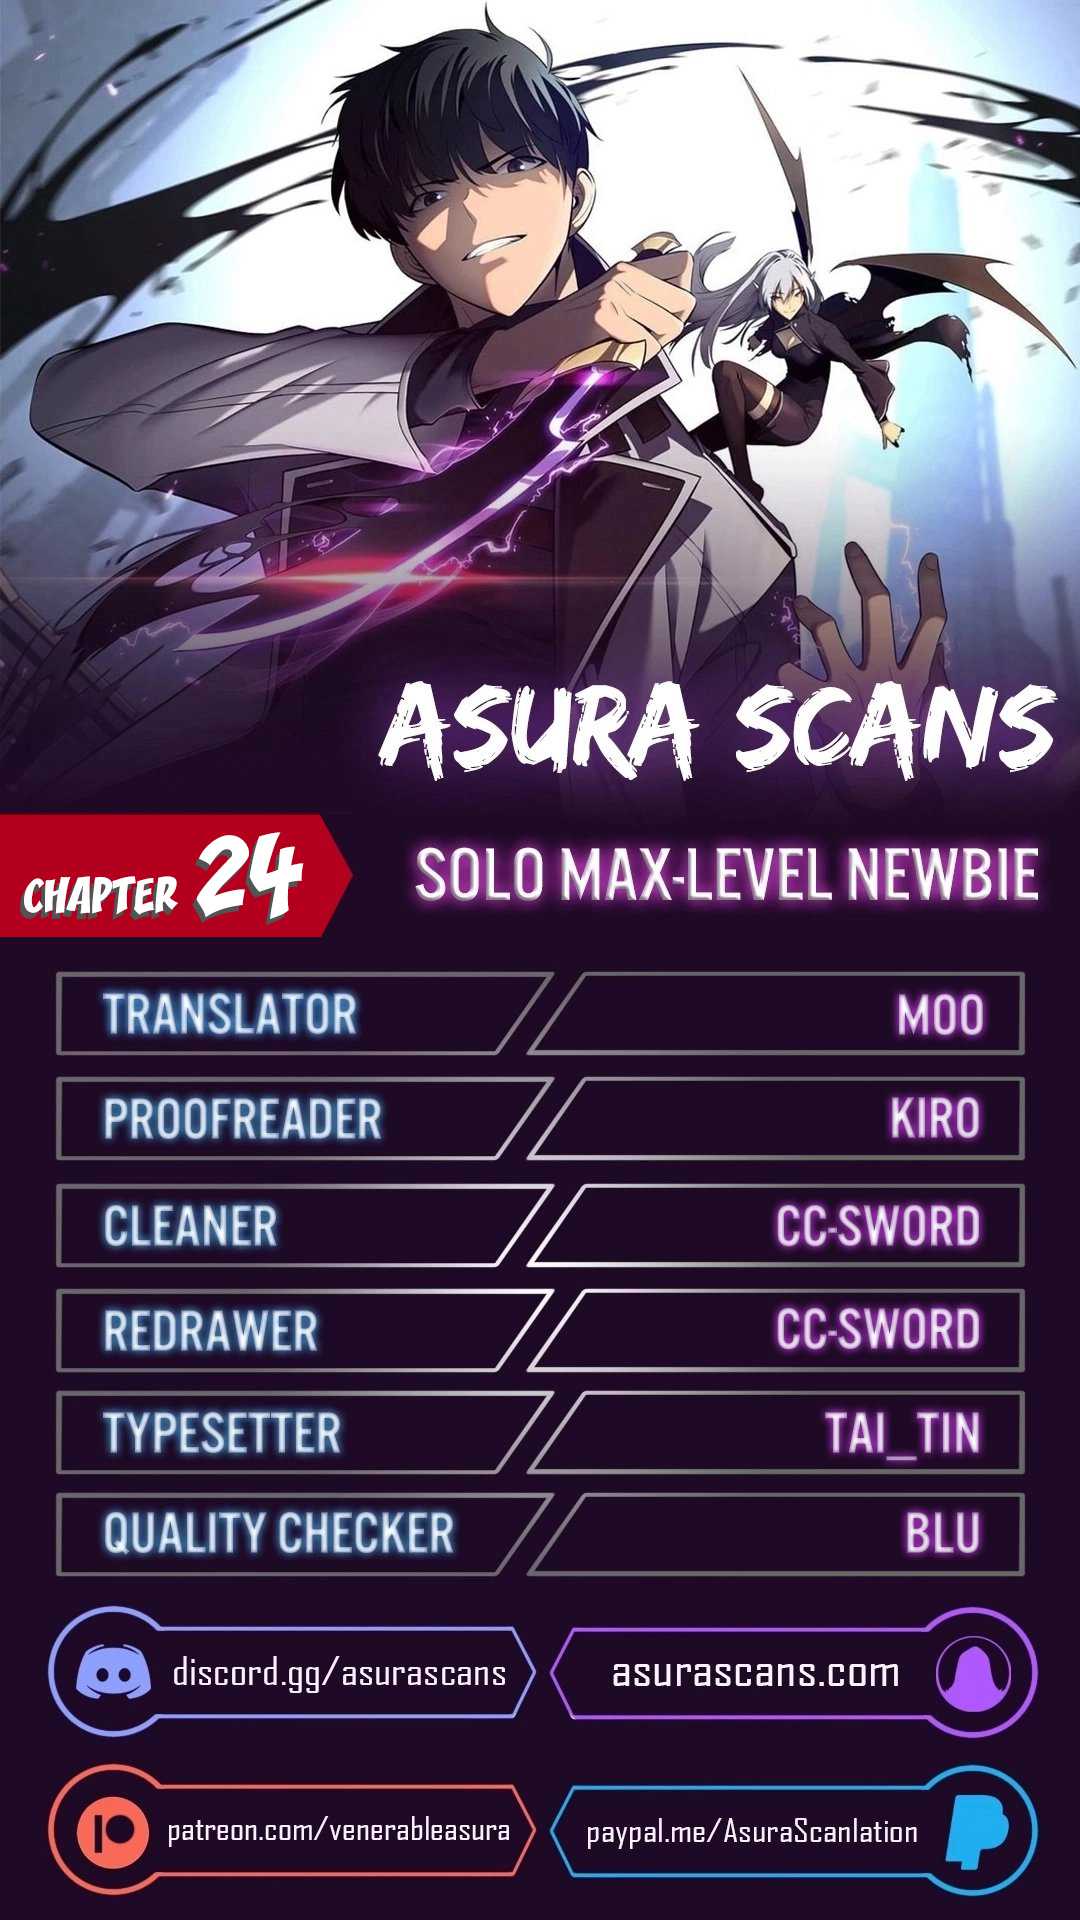 Solo Max-Level Newbie Chapter 24